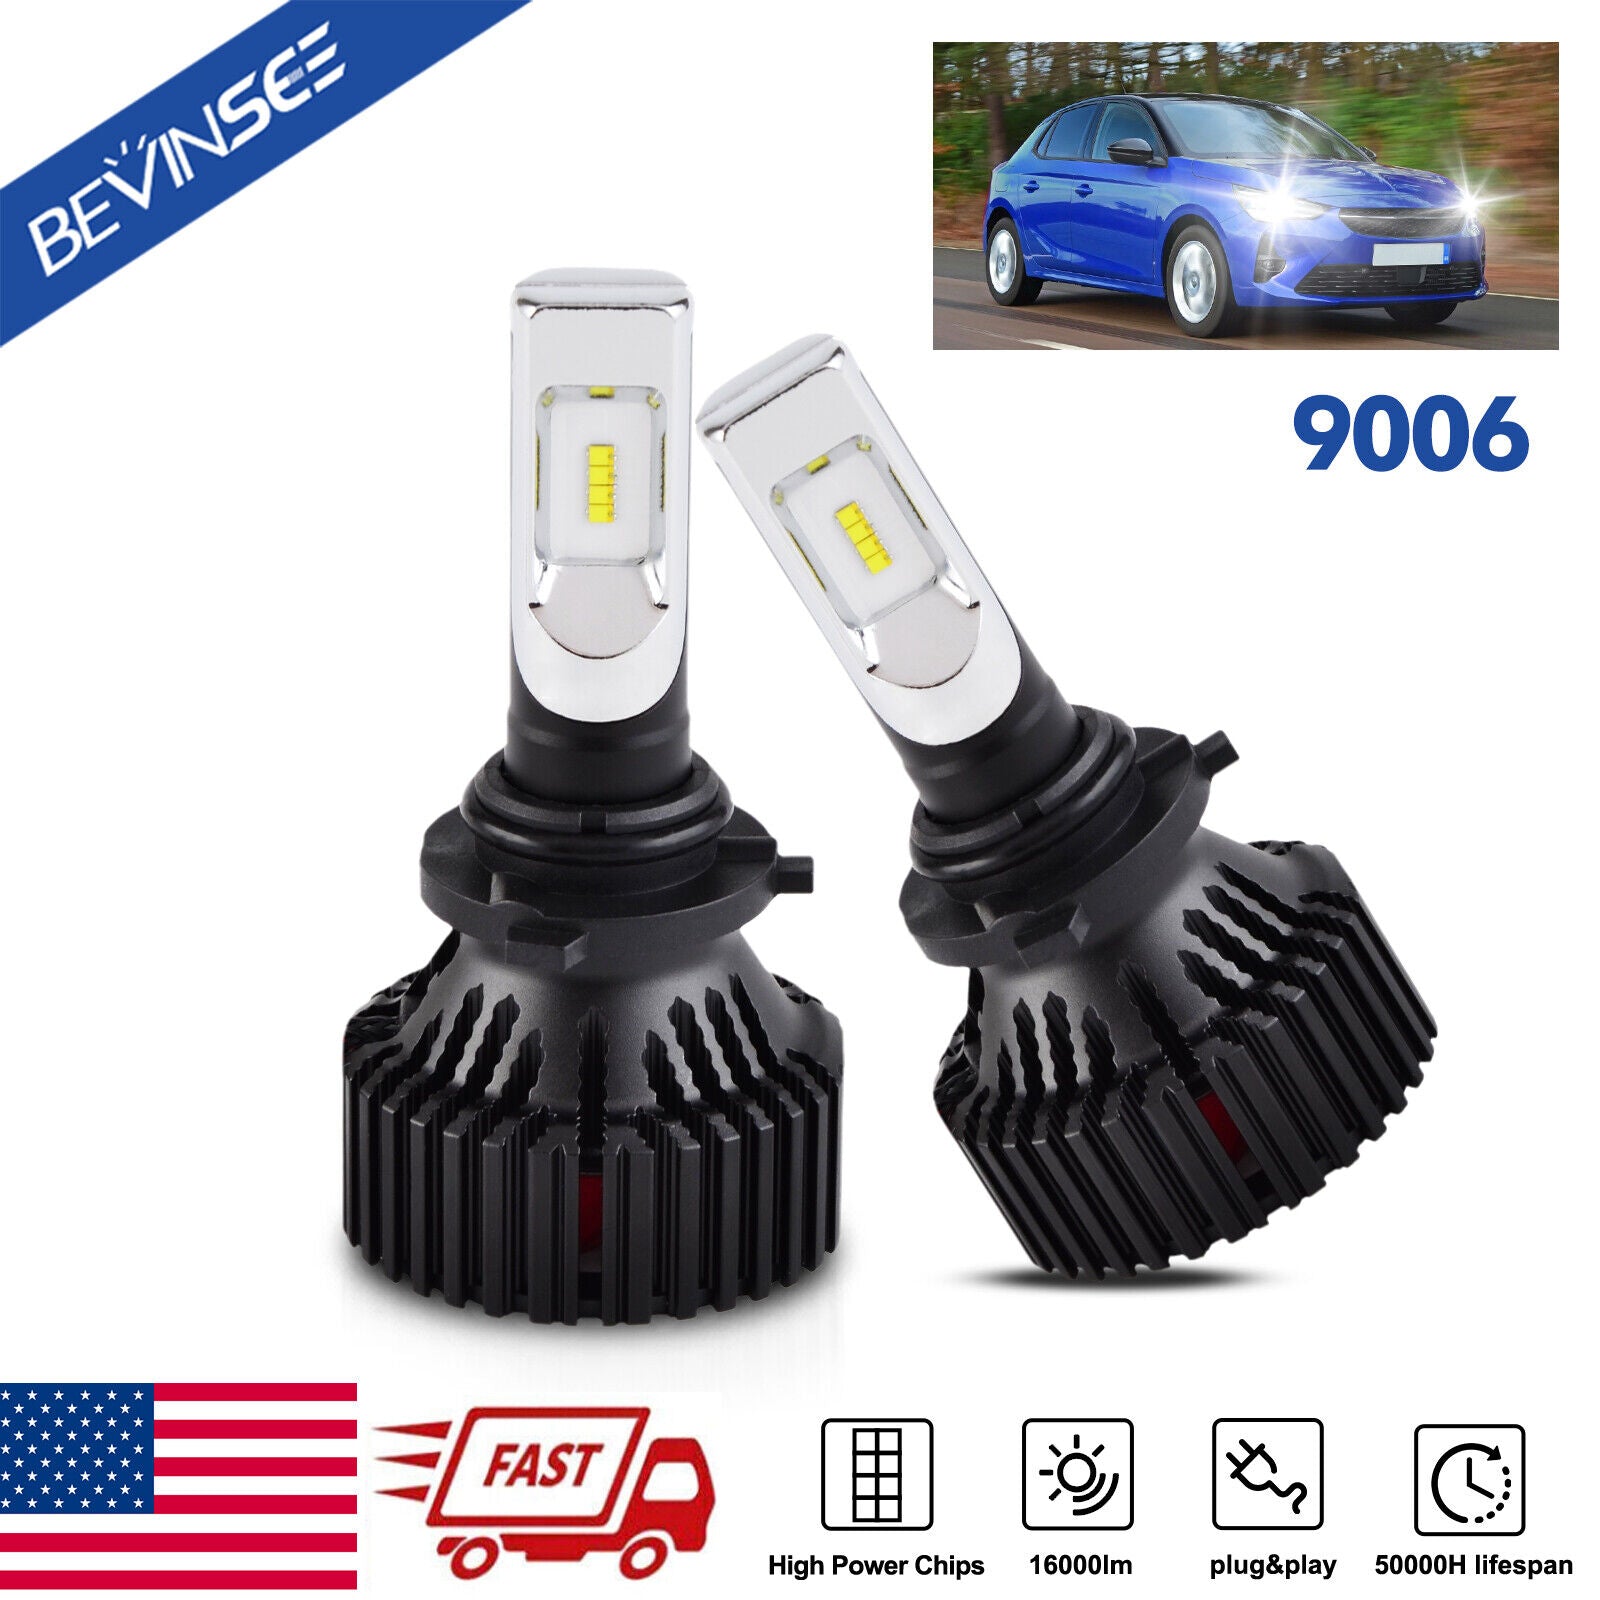 BEVINSEE 9006 HB4 LED Headlight Bulbs Low Beam For Toyota Camry Corolla Matrix